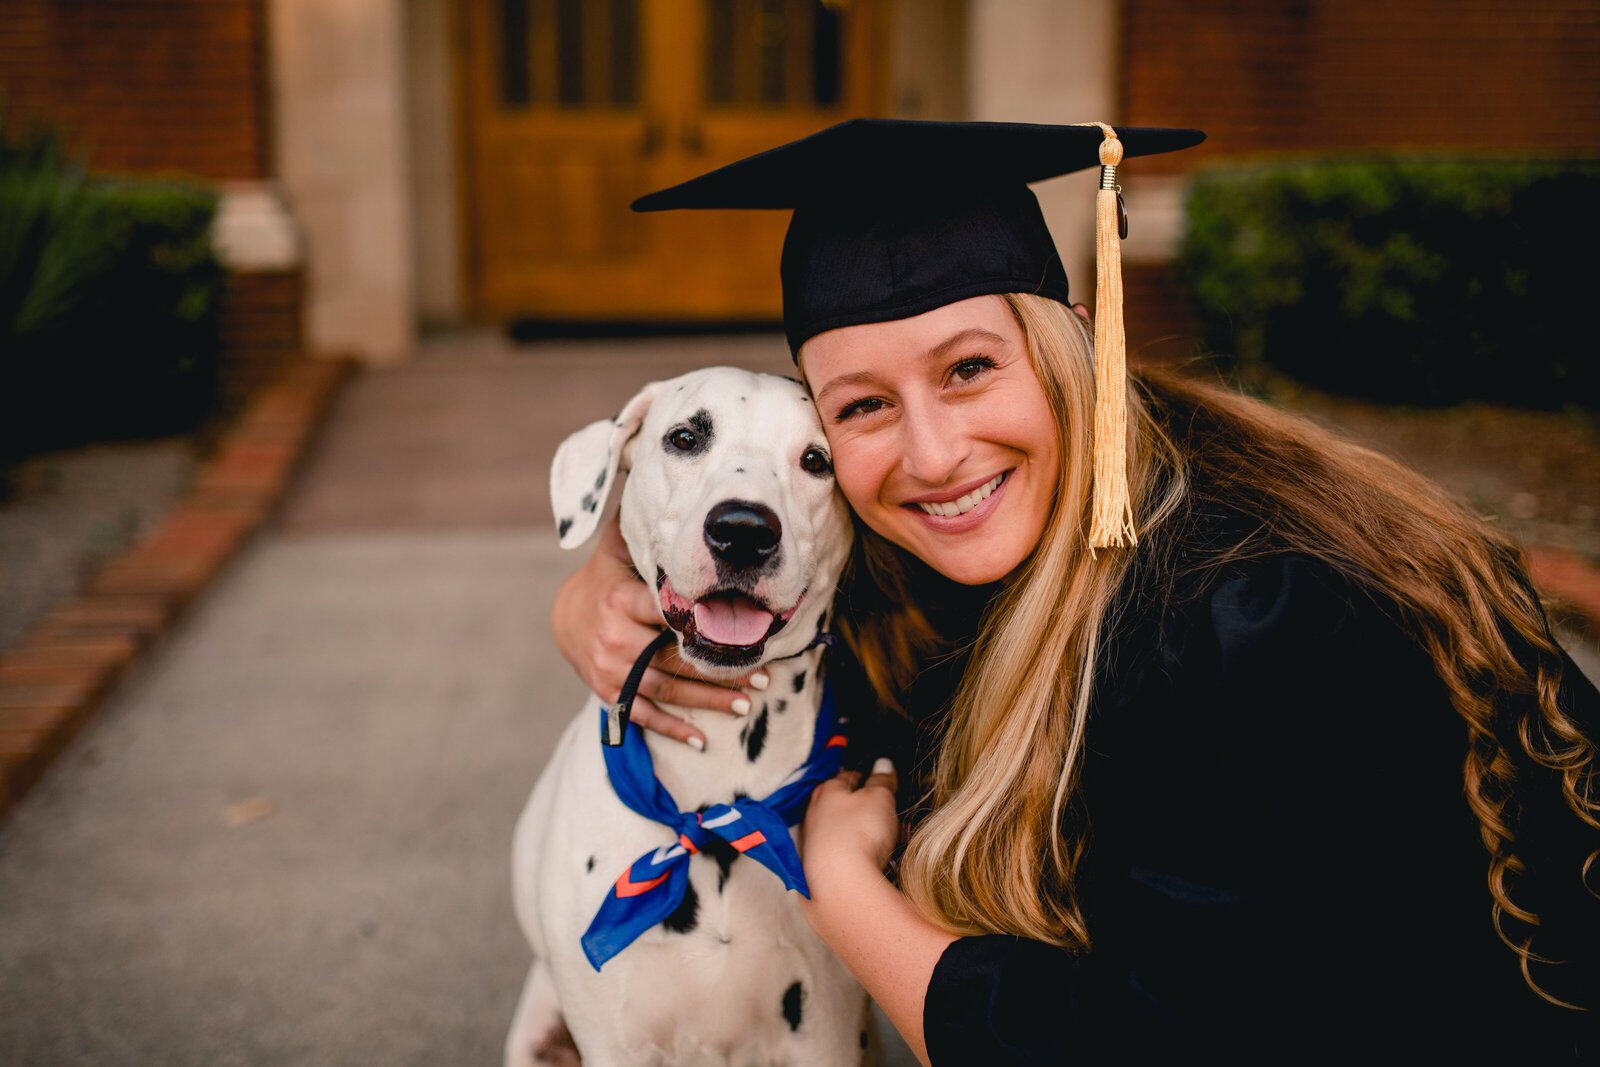 University of Florida photo ideas with cap and gown and dog